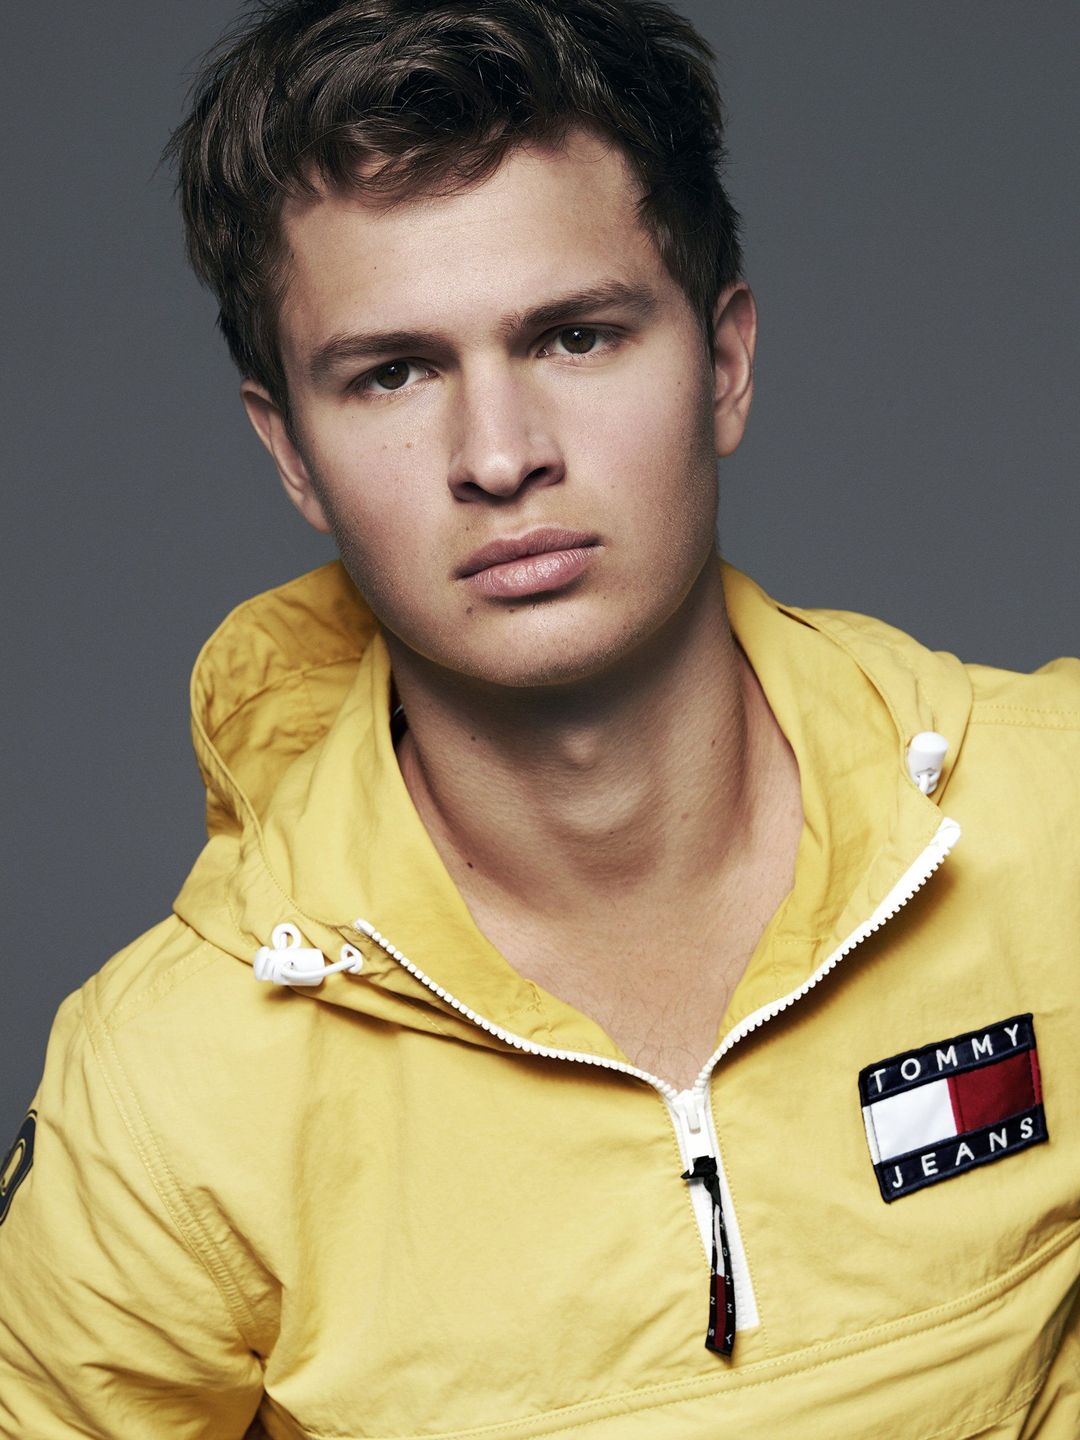 Ansel Elgort who is he